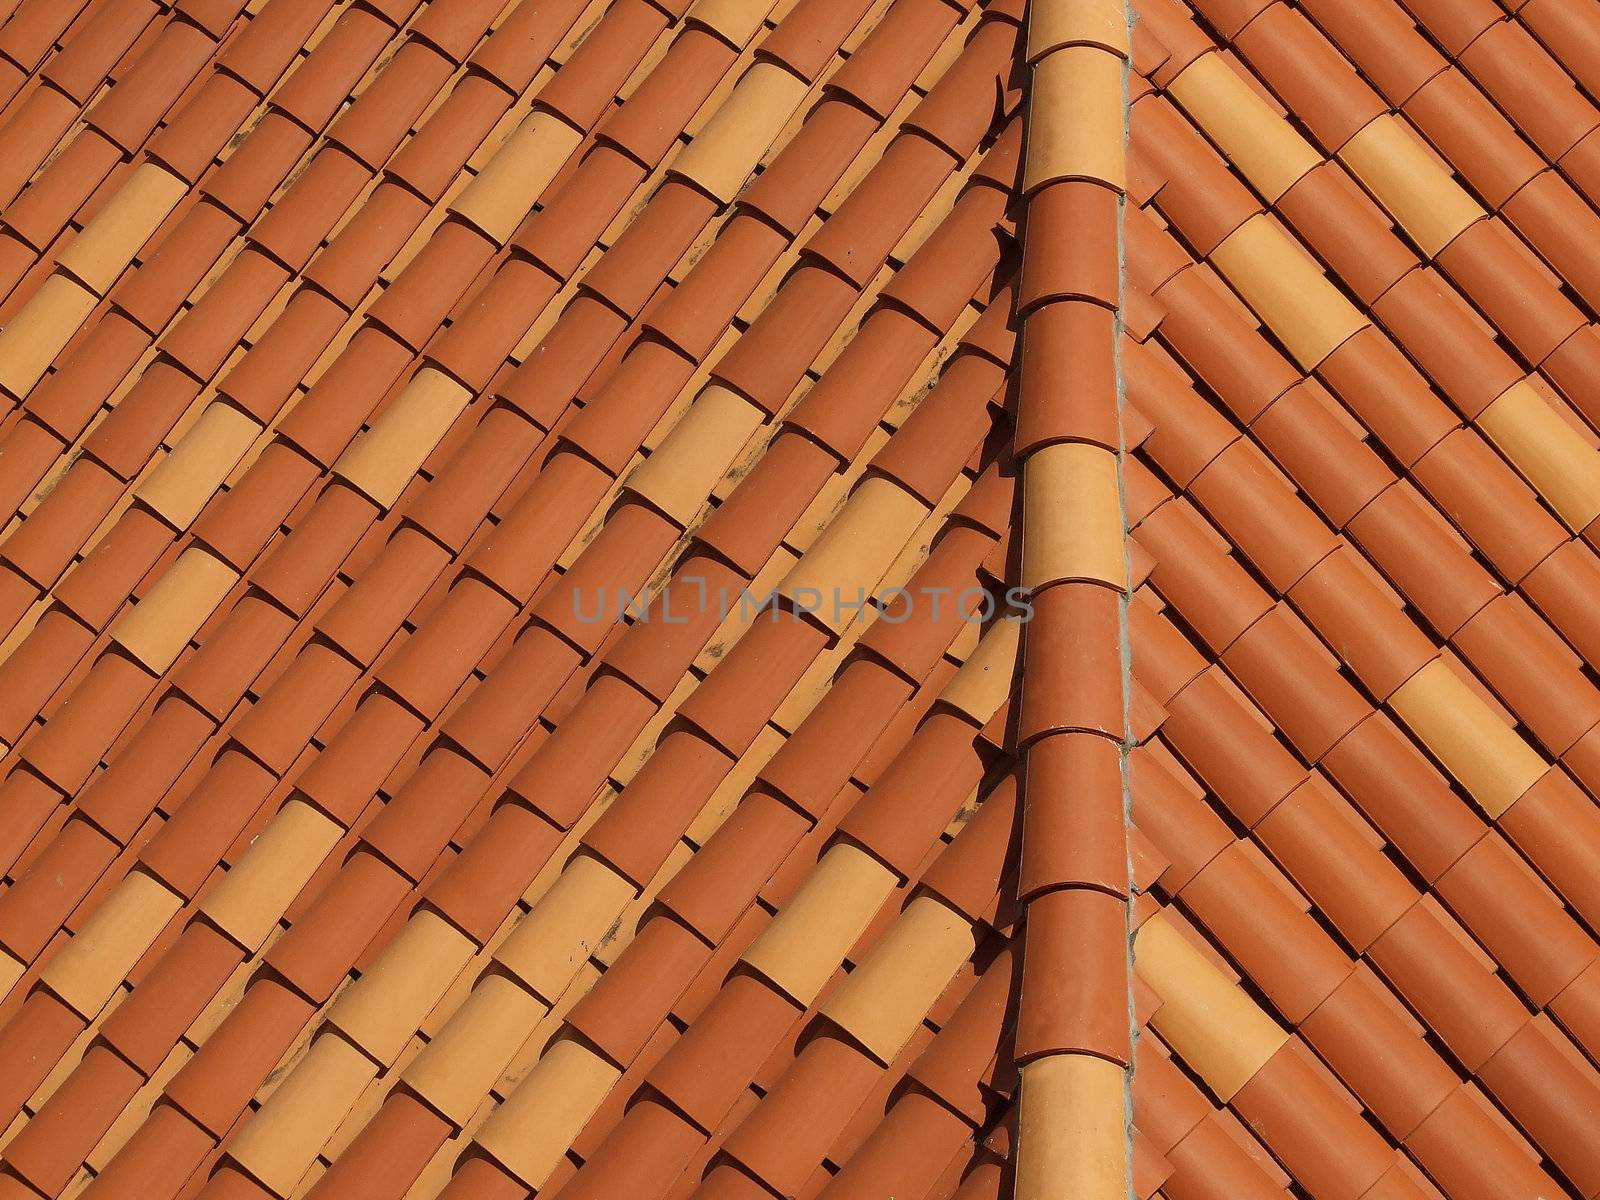 Roof covering of ceramic rustic tiles, aerial view, background